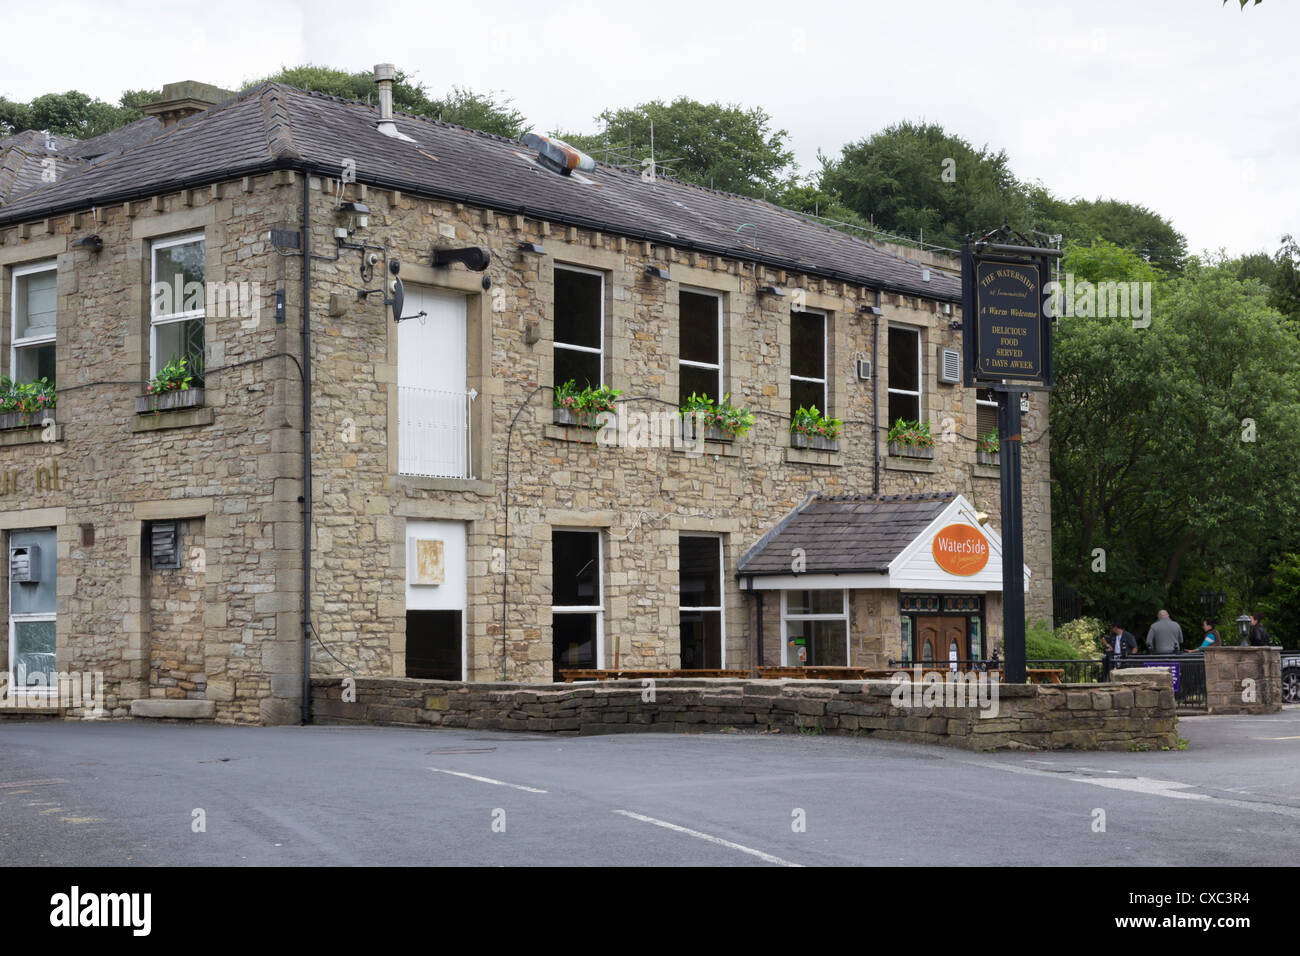 The converted 19th century riverside cotton mill which is the Waterside restaurant at Summerseat, Bury, Lancashire, since destroyed by flood waters.. Stock Photo